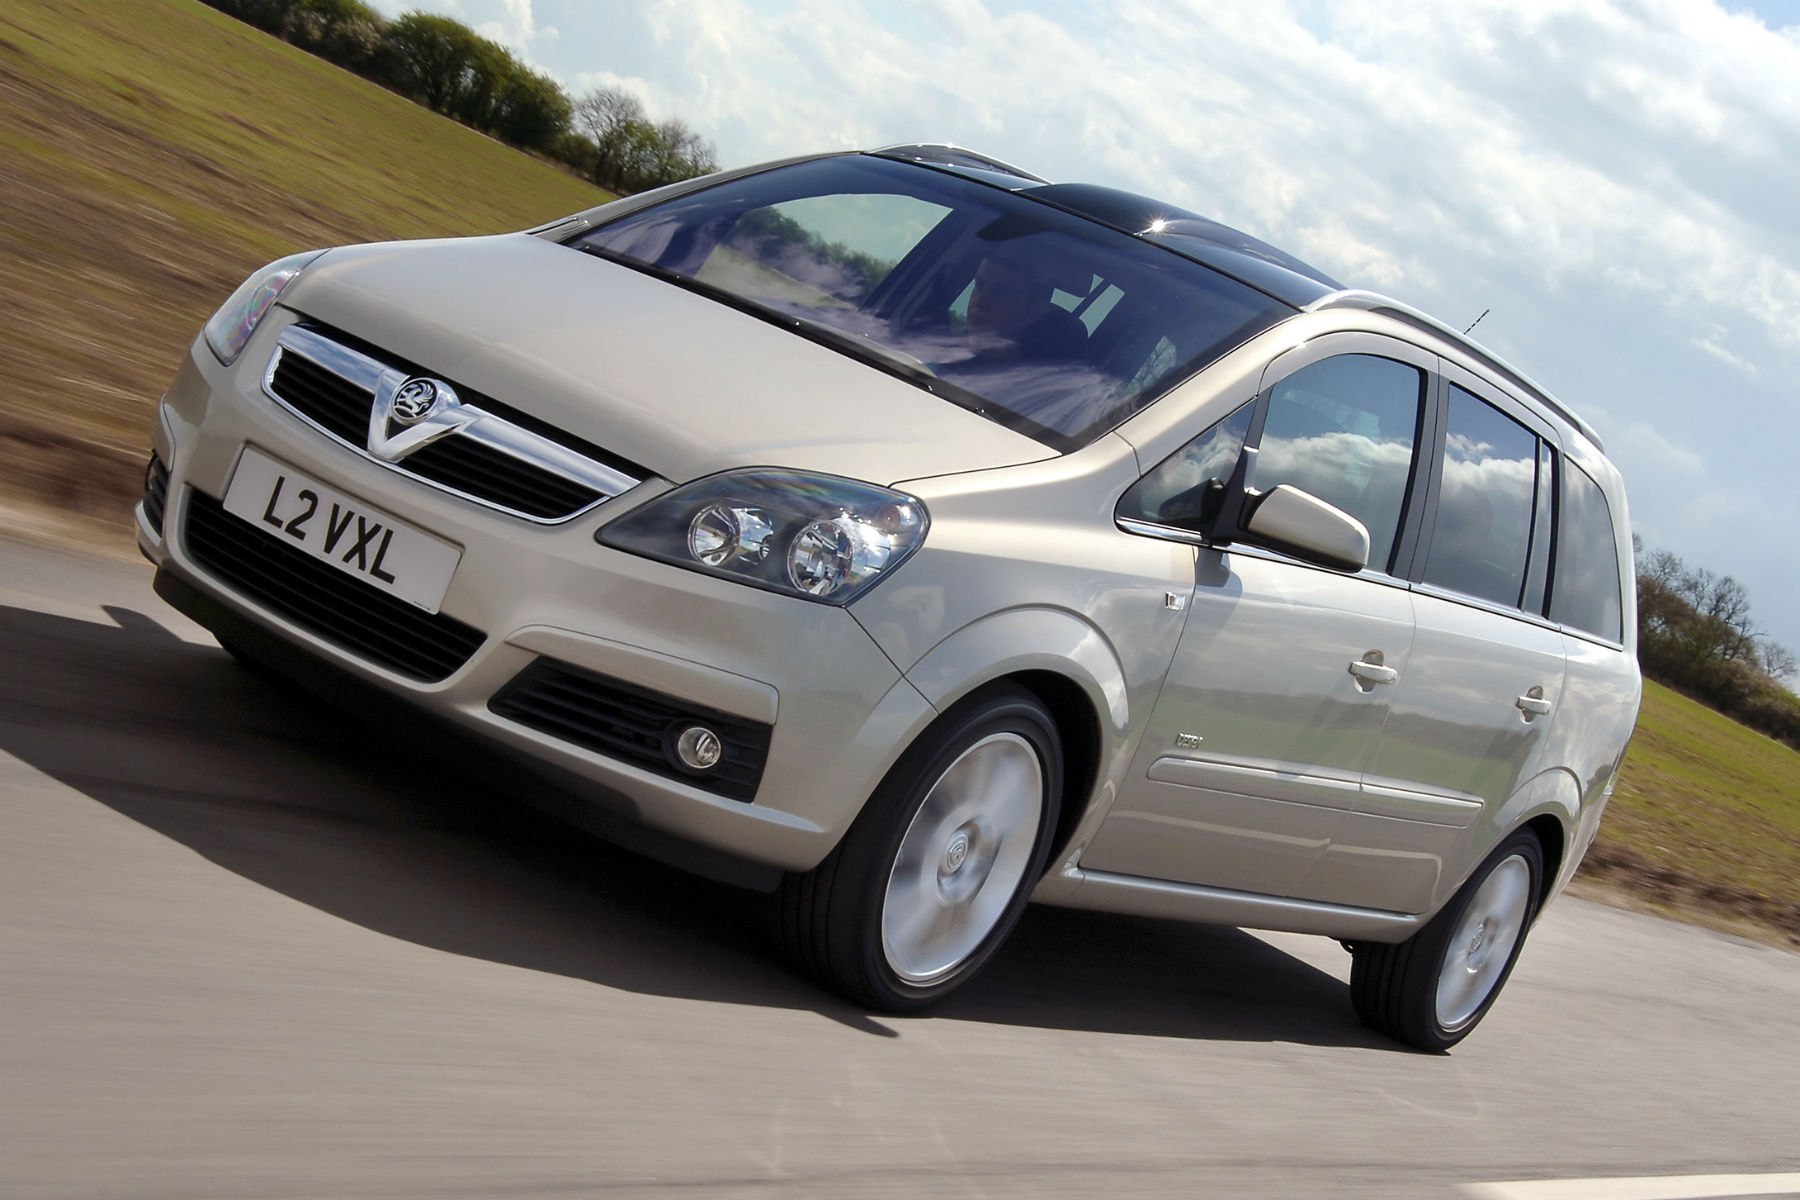 Vauxhall issues SECOND recall over Zafira fire risk